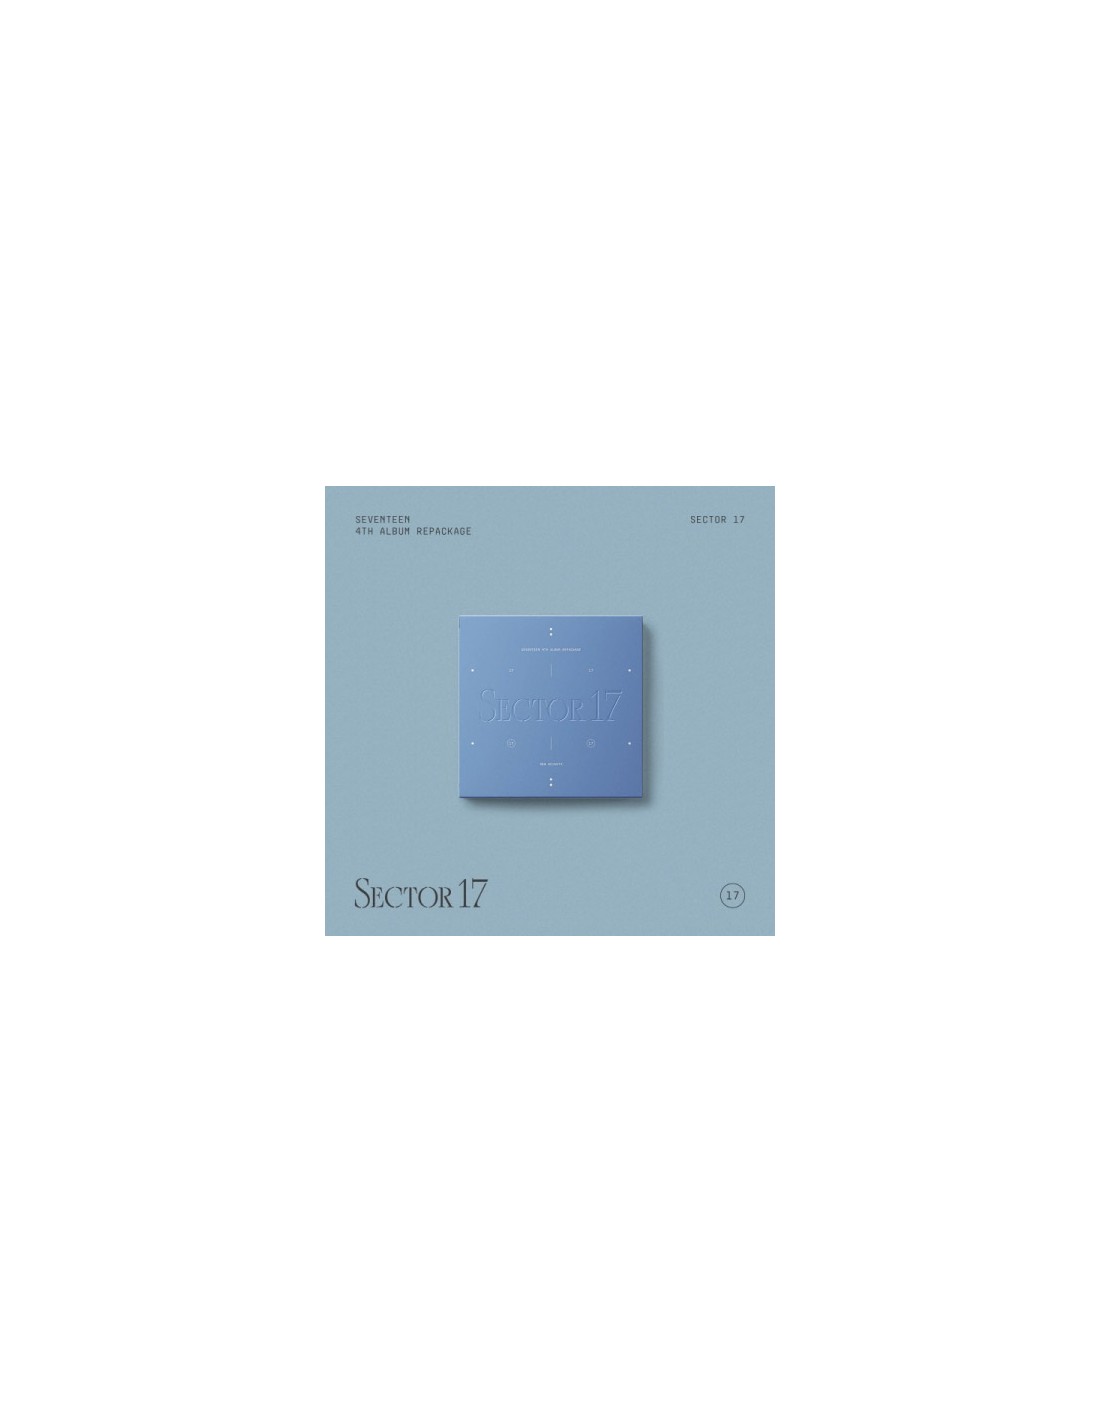 SEVENTEEN 4th Repackage Album - SECTOR 17 (New Heights Ver.) CD + Poster